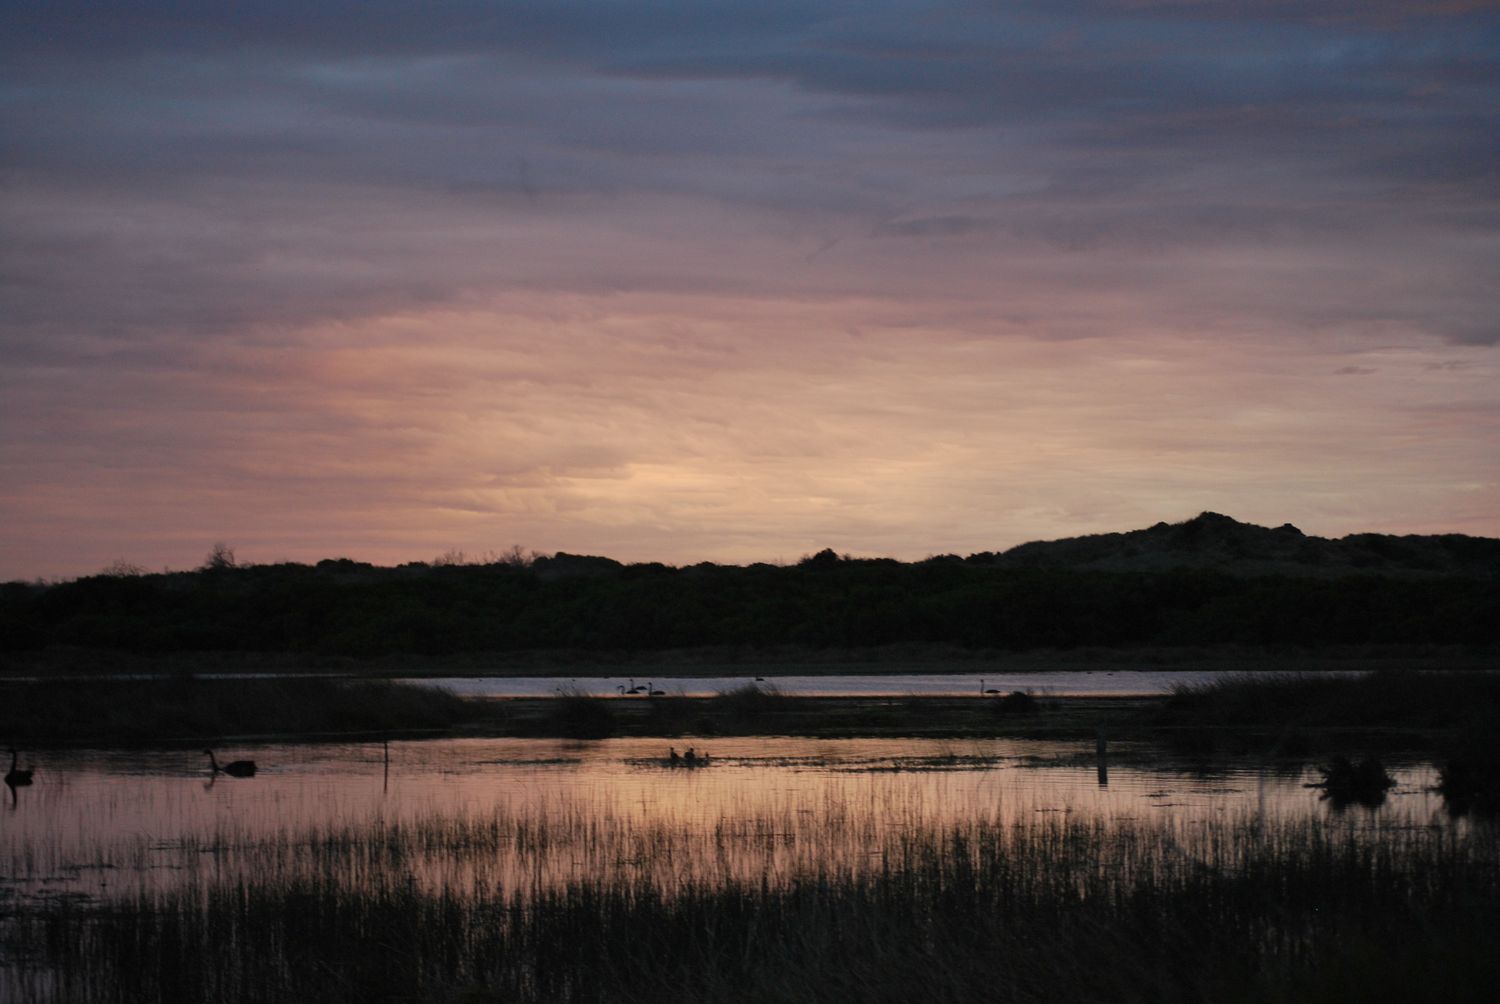 A photograph of Belfast Coastal Reserve at sunset. There is a wetland with lots of reeds and swans. In the background there are hills.